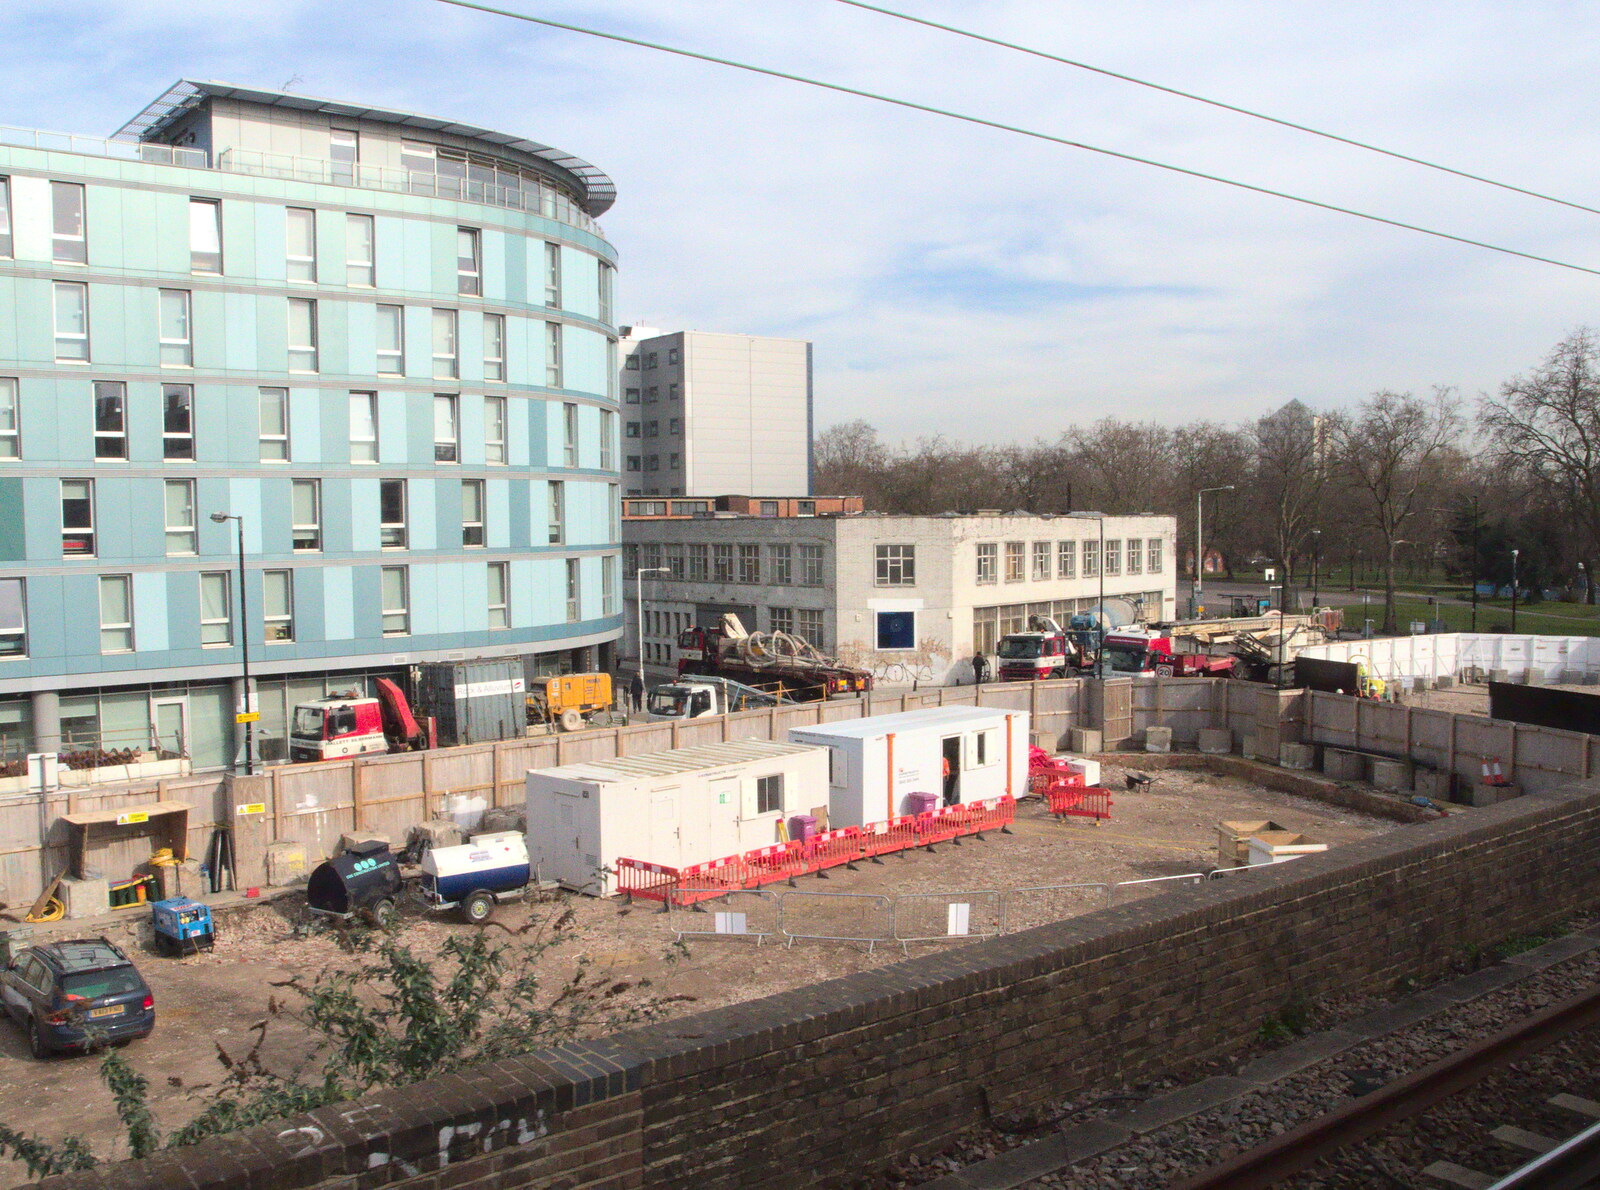 More building site action from The Mobile Train Office, Diss to London - 5th March 2015